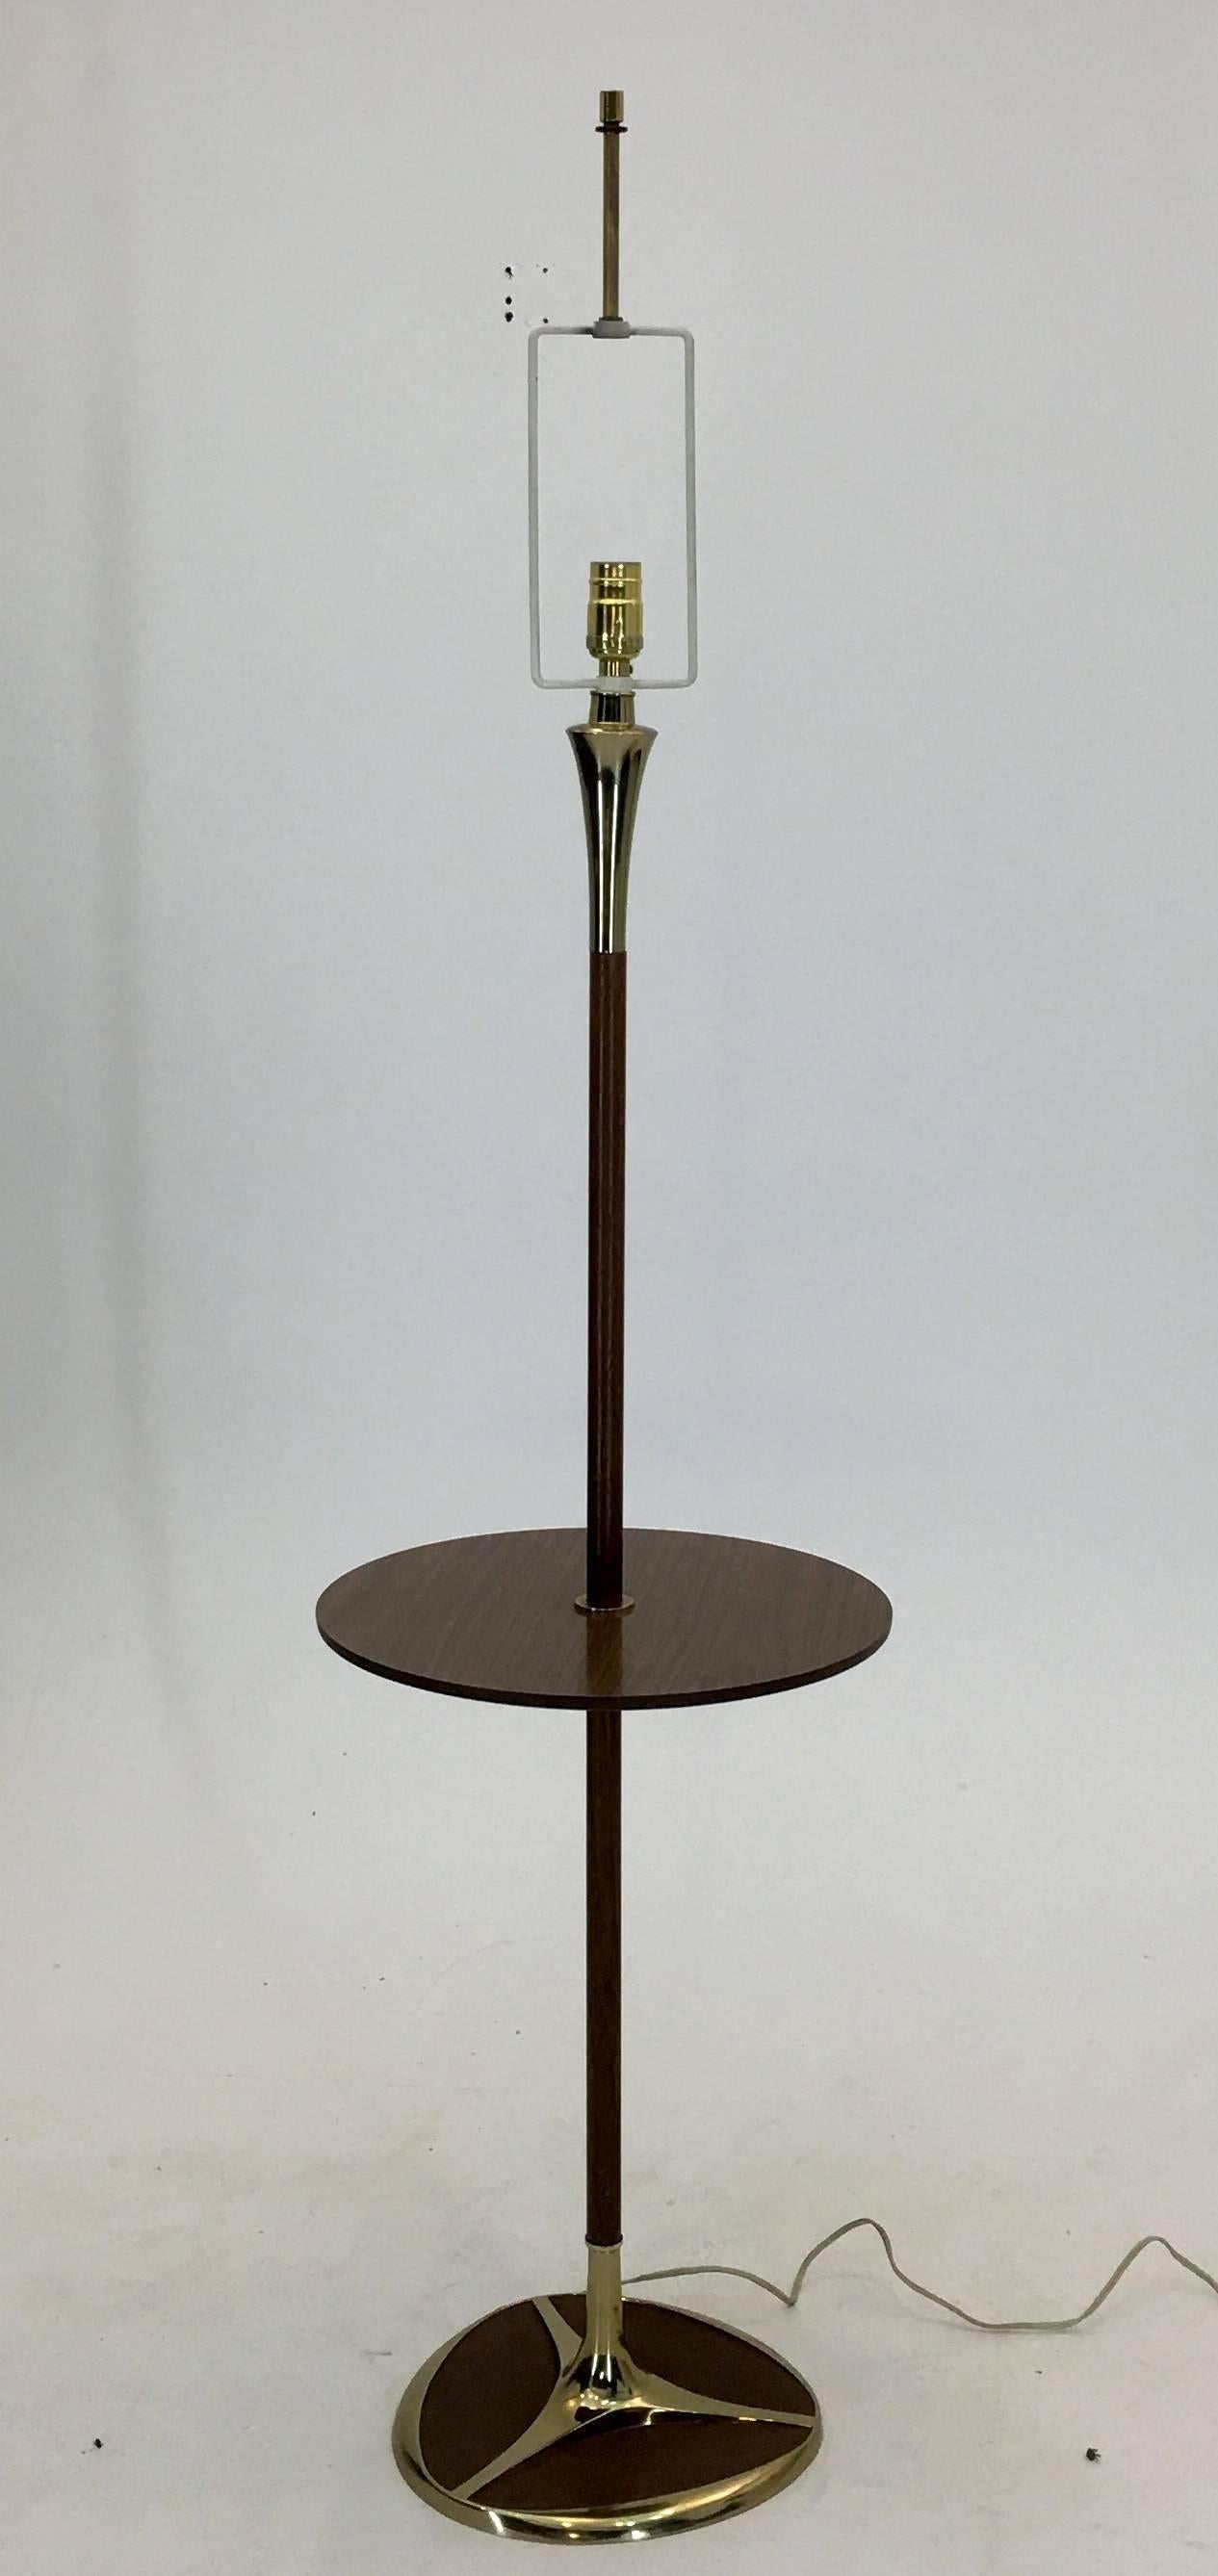 Produced circa 1965, this design from Laurel lamp company is generally attributed to Gerald Thurston who made a number of designs for the Laurel Lamp Company. Features an inlay upon a tulip styled base and is quite elegant.

This floor lamp is in